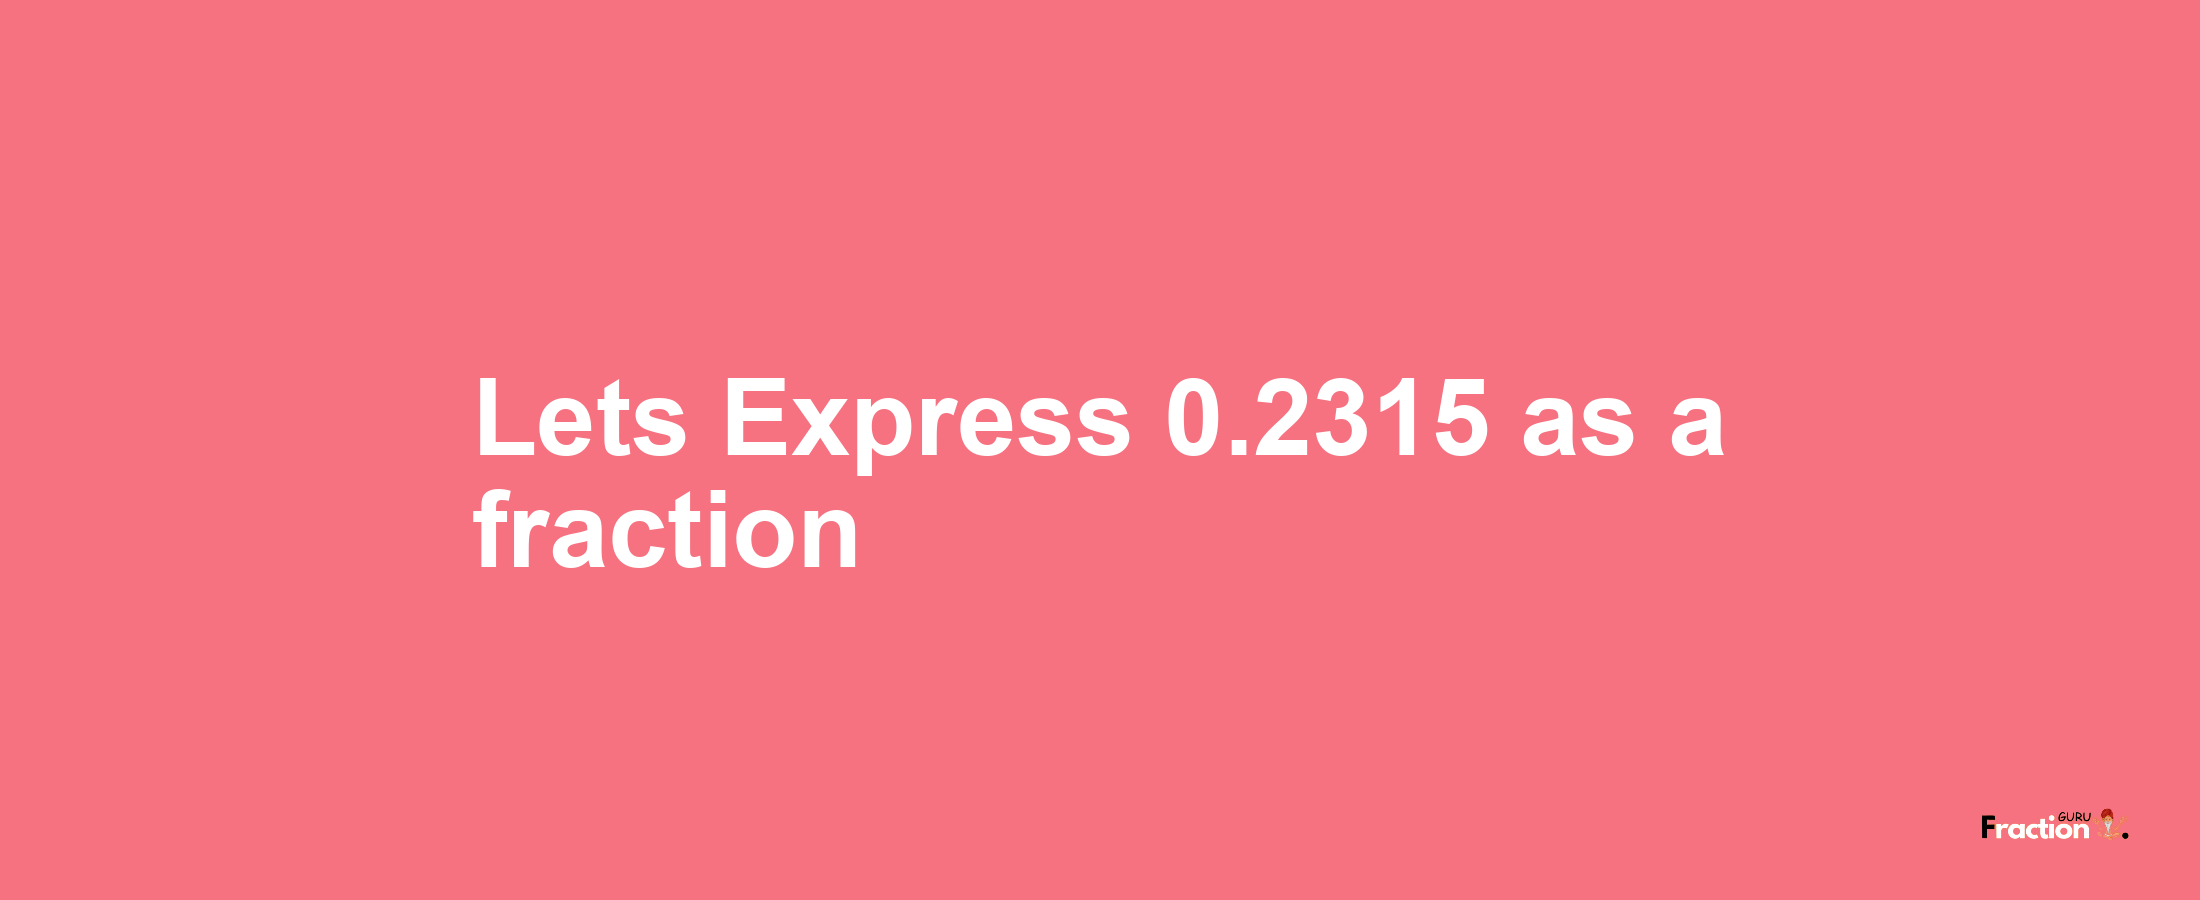 Lets Express 0.2315 as afraction